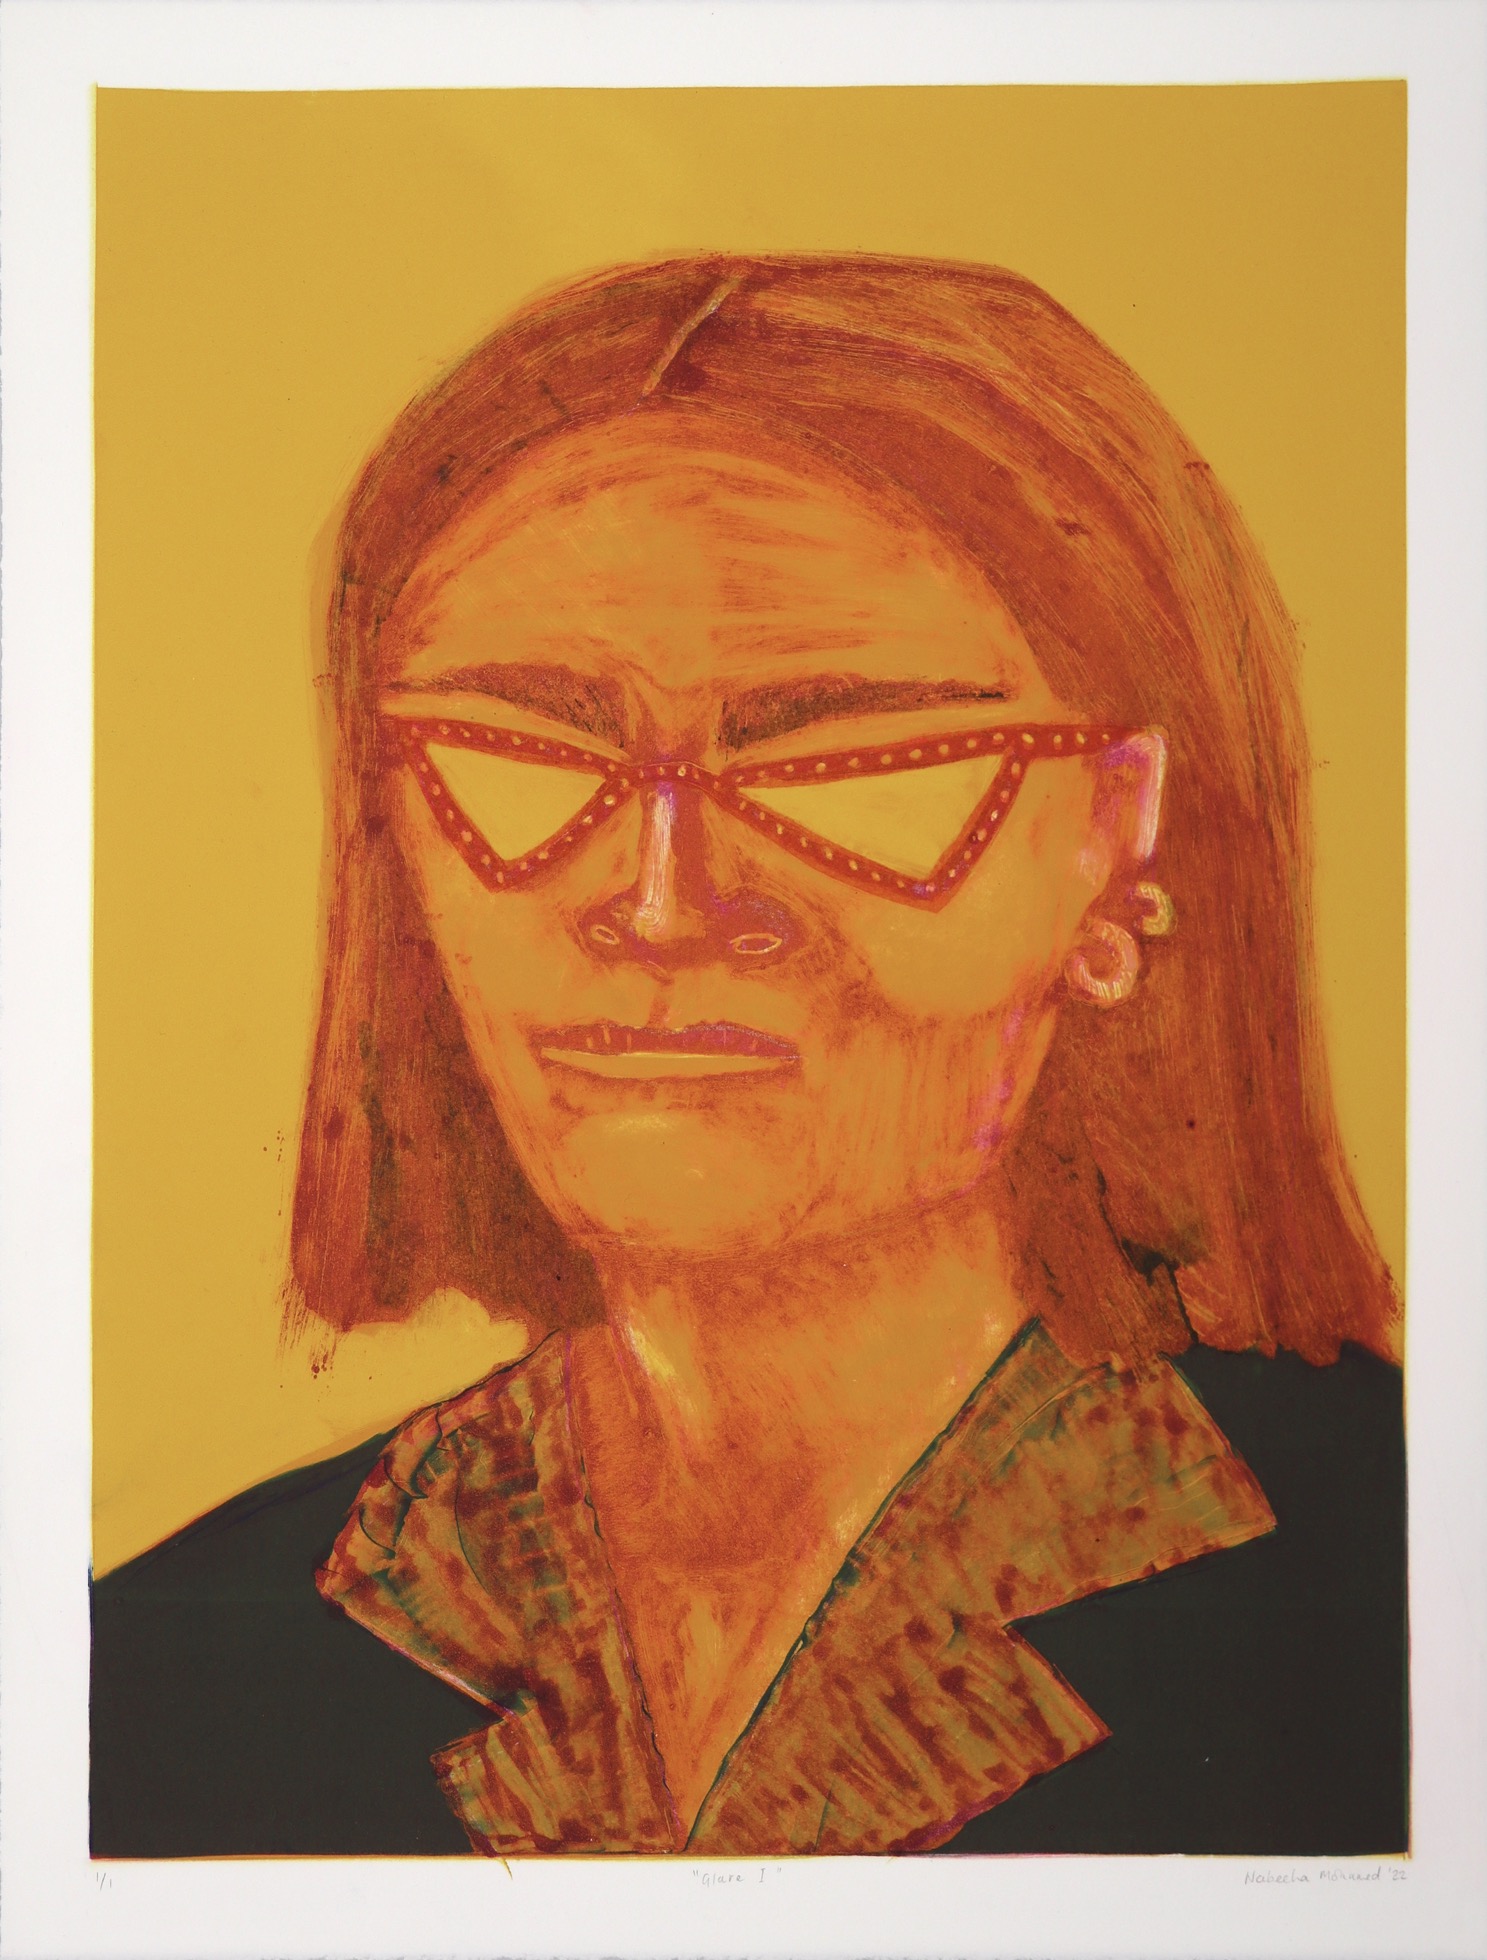 Head and shopulders monotype portrait of woman wearing sunglasses by Nabeeha Mohamed